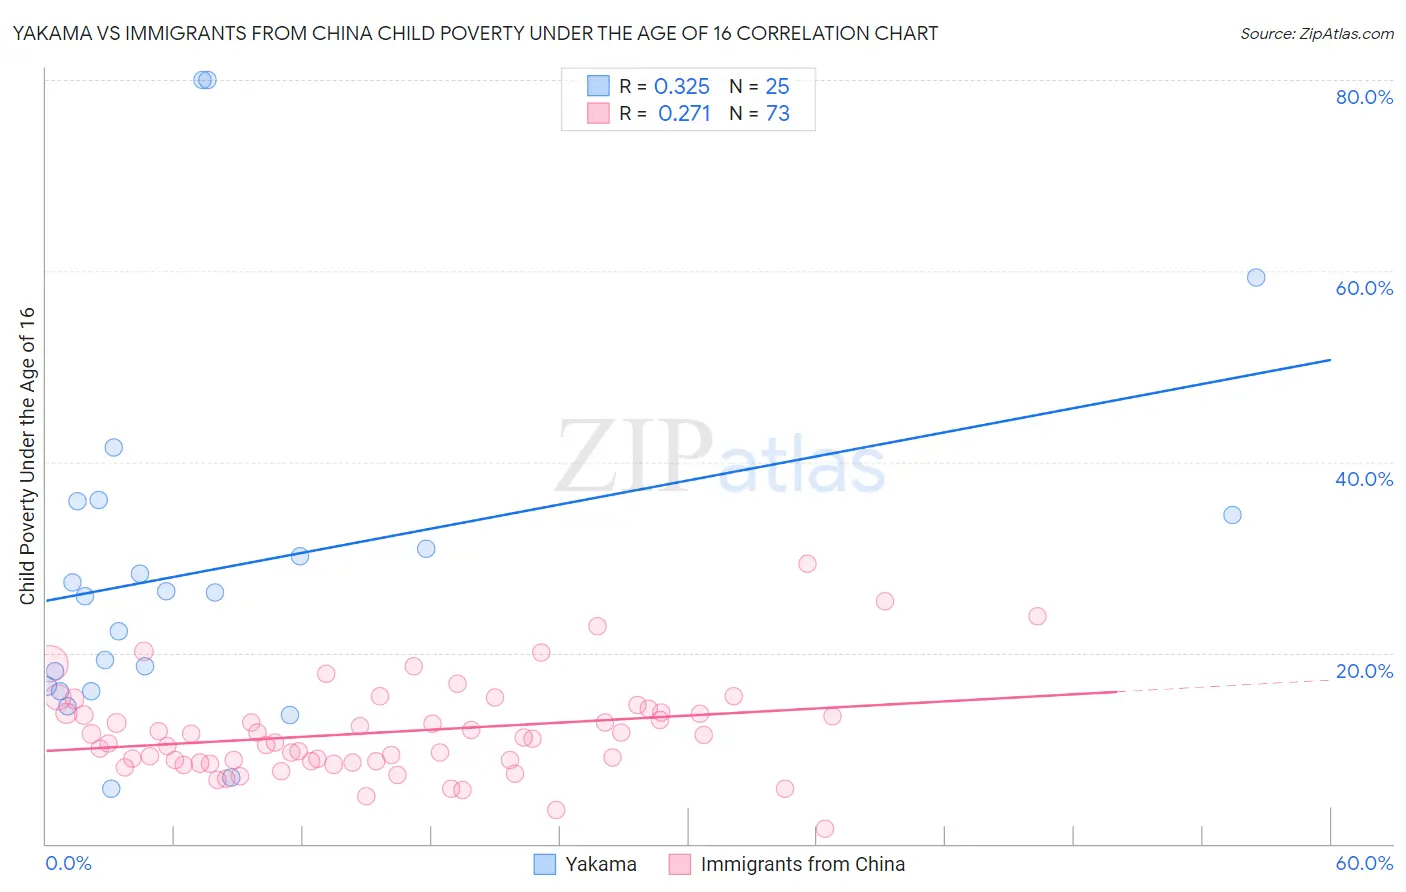 Yakama vs Immigrants from China Child Poverty Under the Age of 16